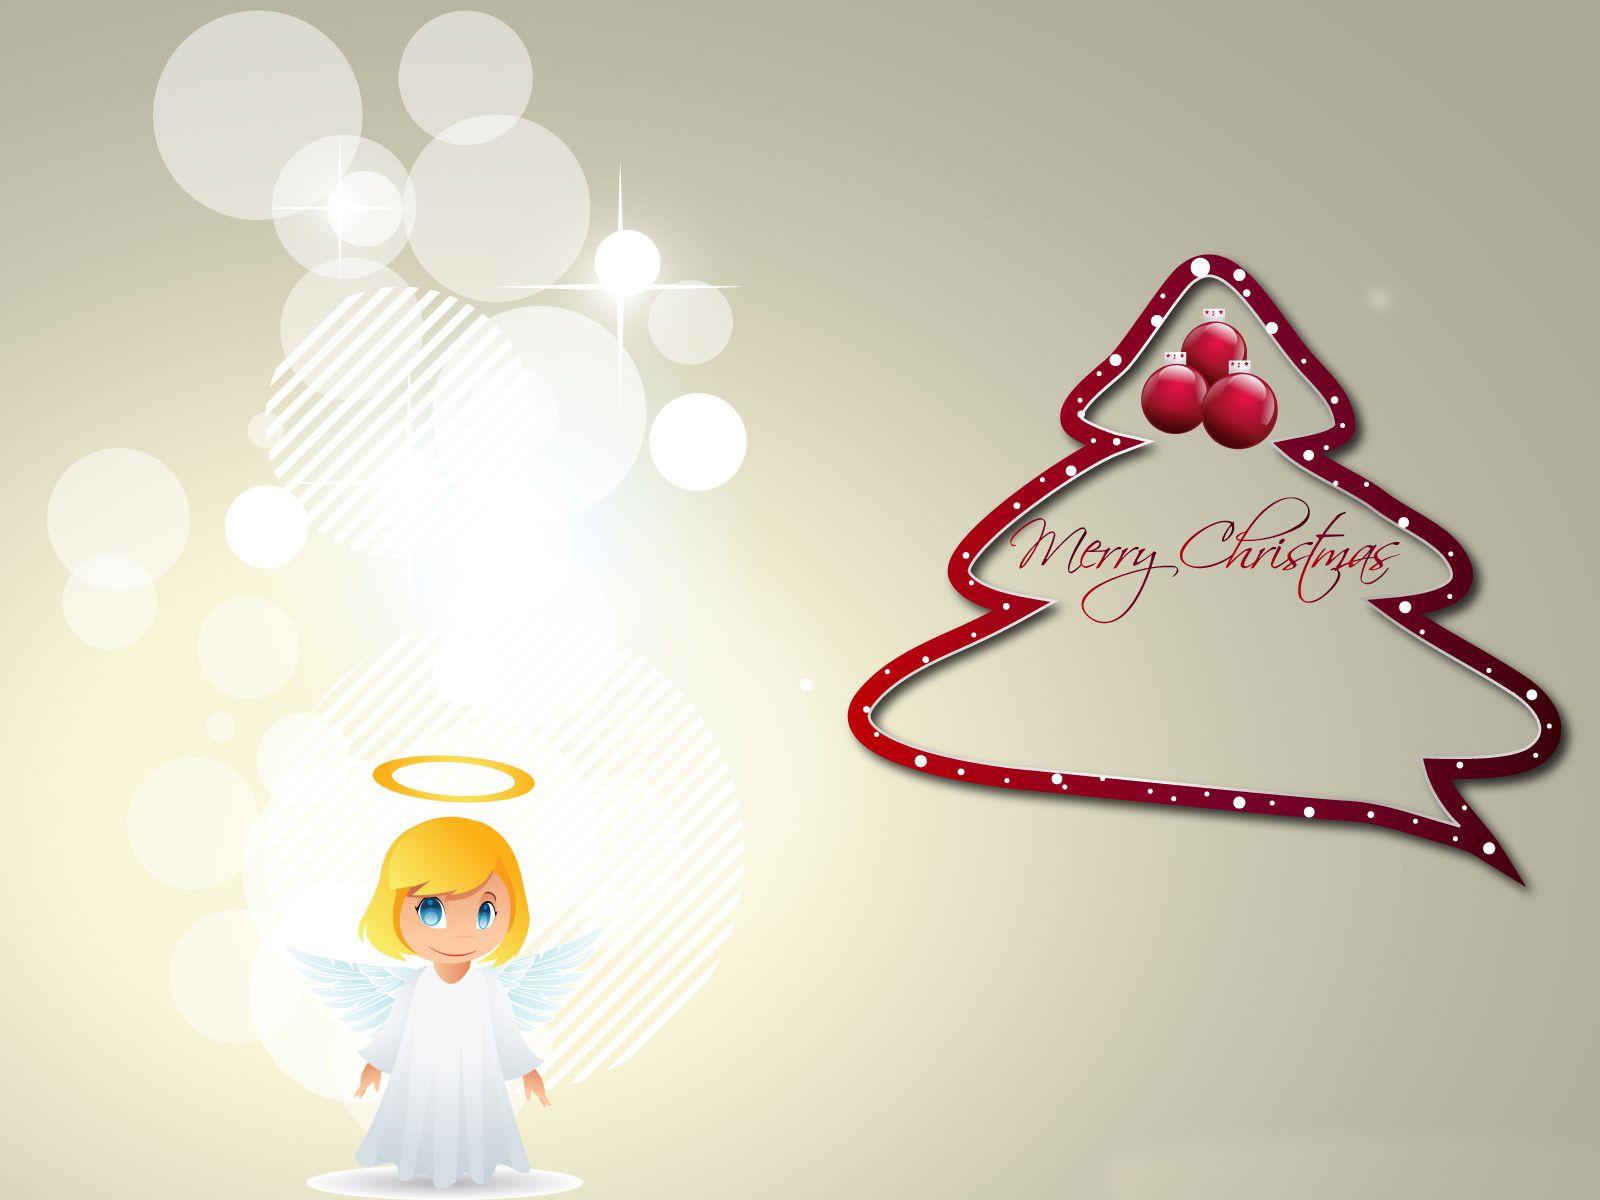 4K Ultra HD Image Collection of Christmas Angels: Livius Hoffner